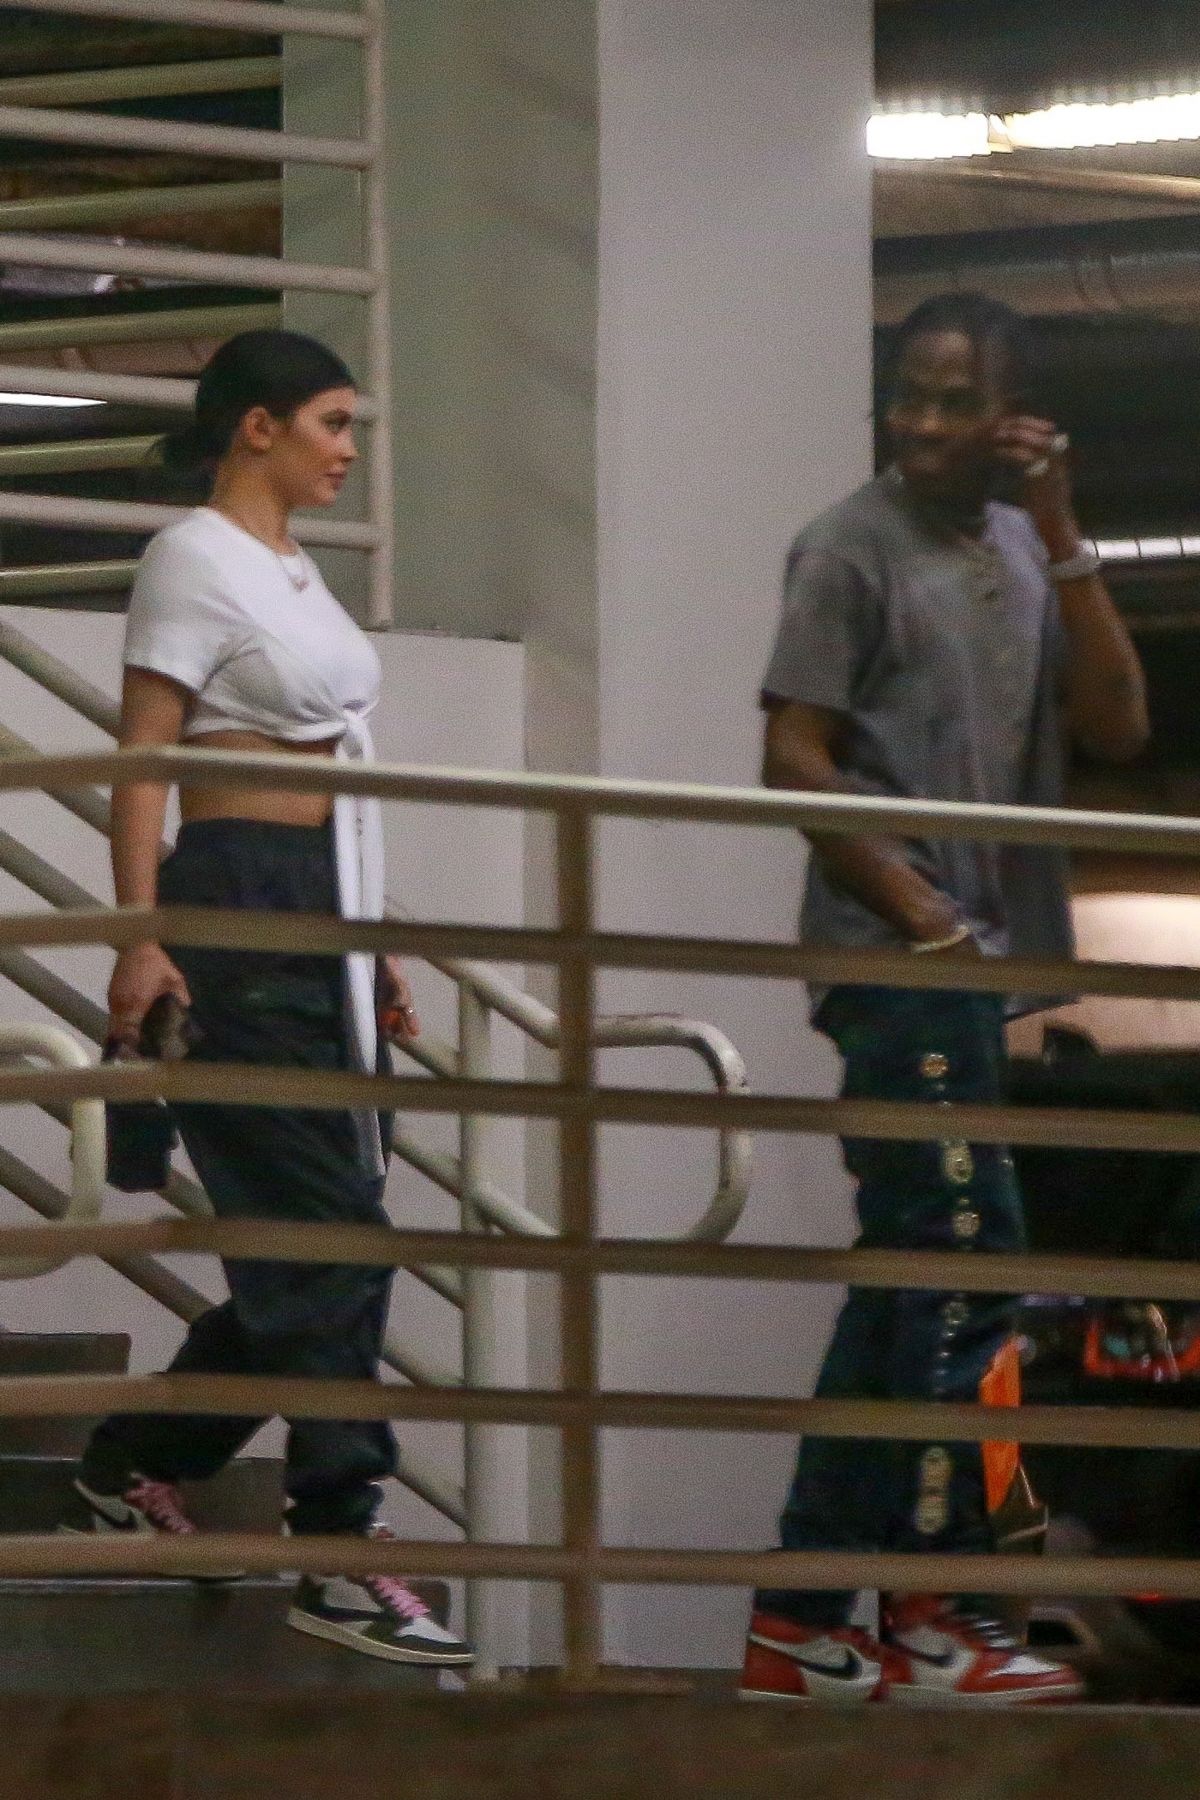 kylie-jenner-and-travis-scott-out-in-beverly-hills-04-08-2019-1.jpg